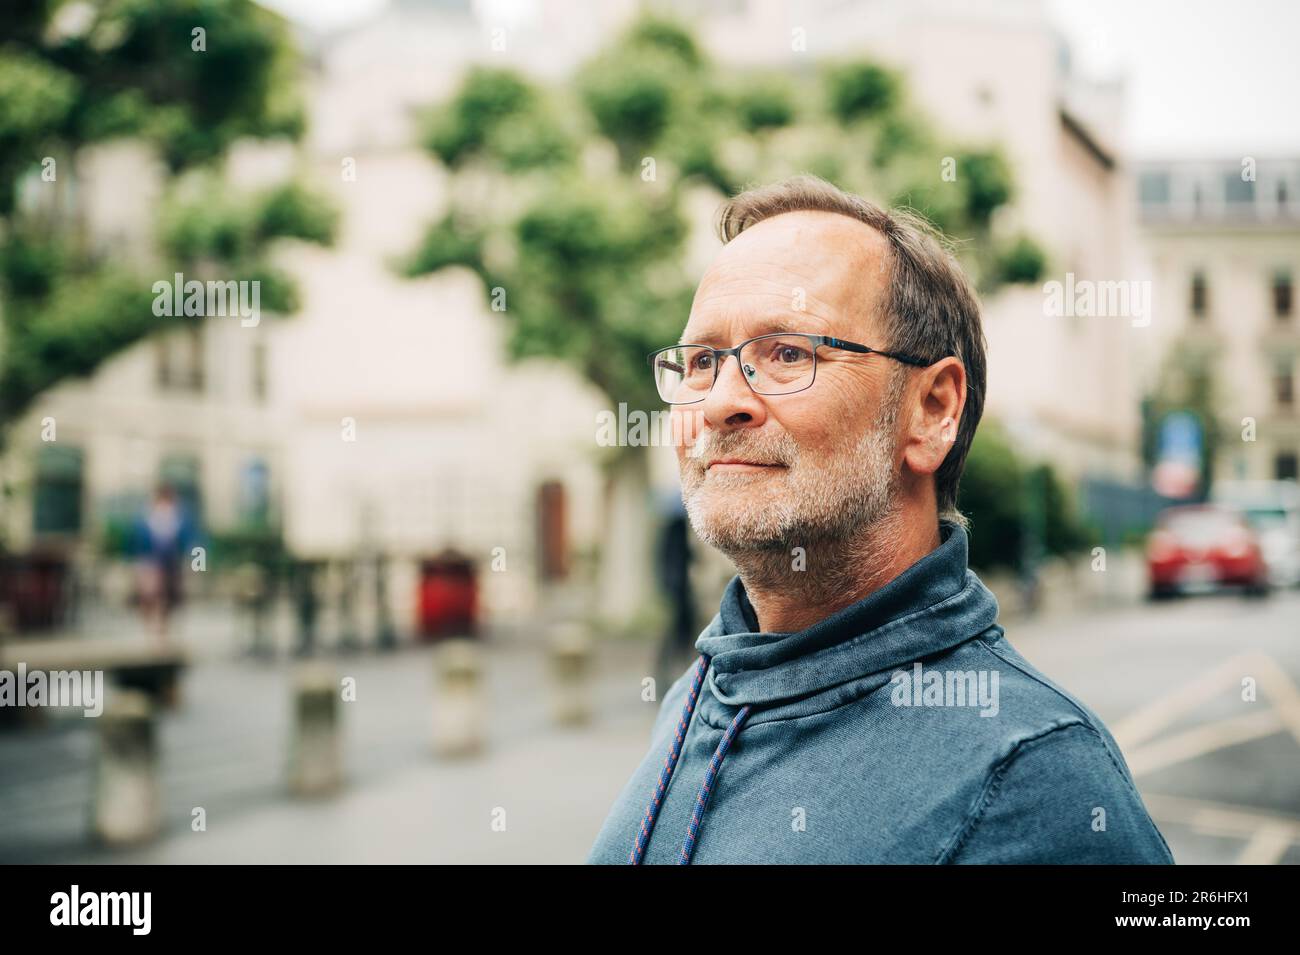 Outdoor portrait of middle age man on city street, wearing eyeglasses and blue sweatshirt Stock Photo